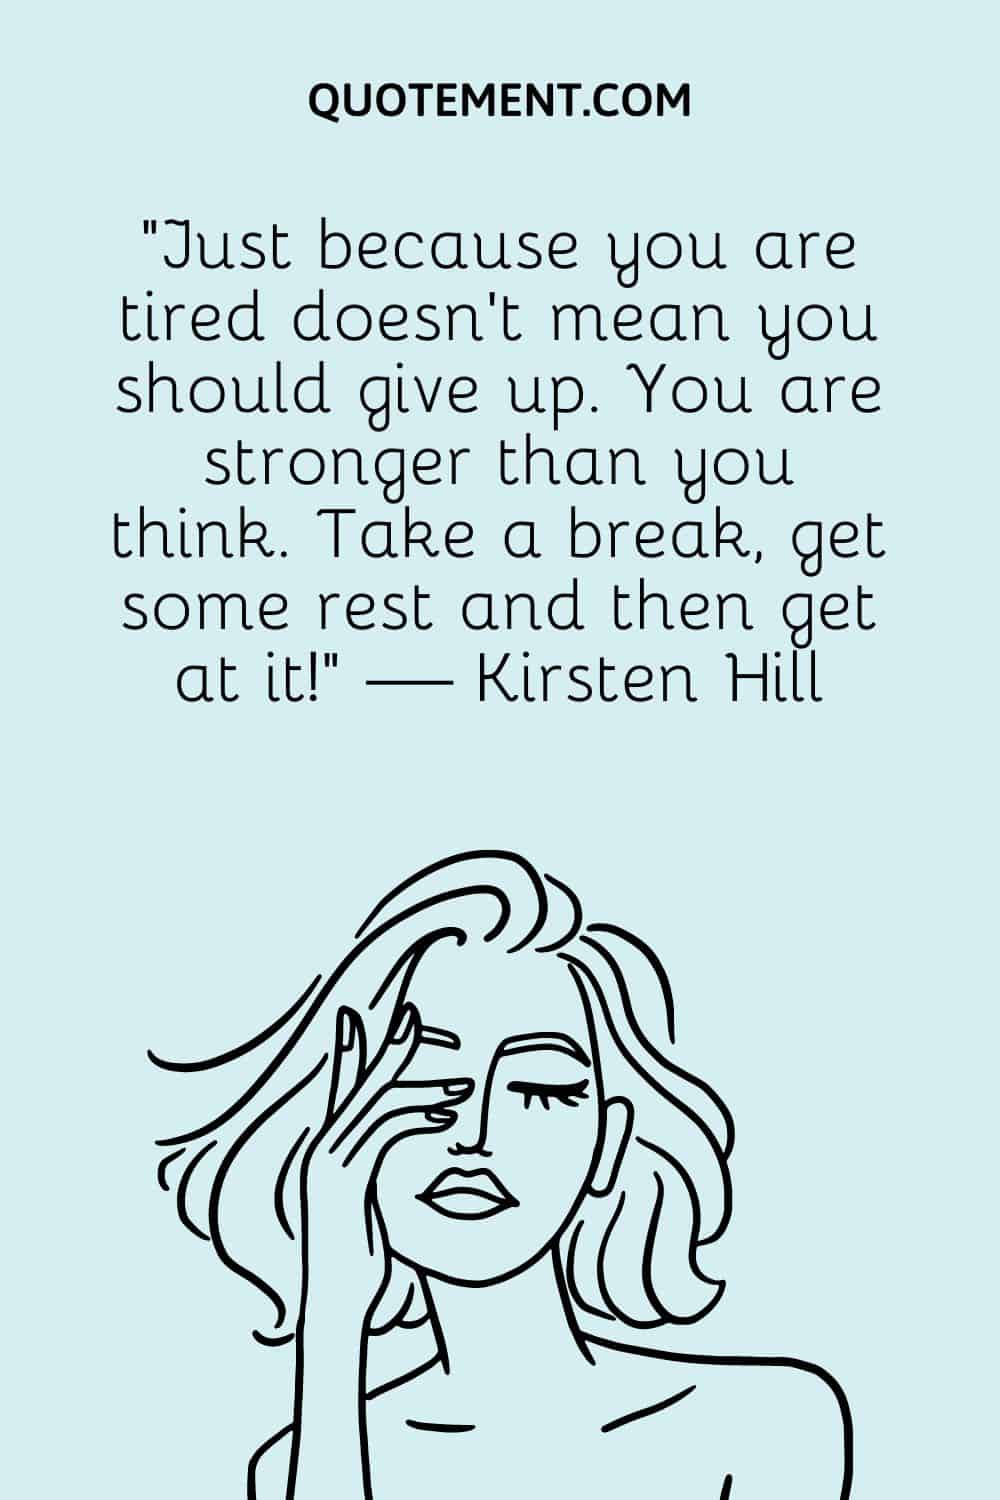 Just because you are tired doesn’t mean you should give up